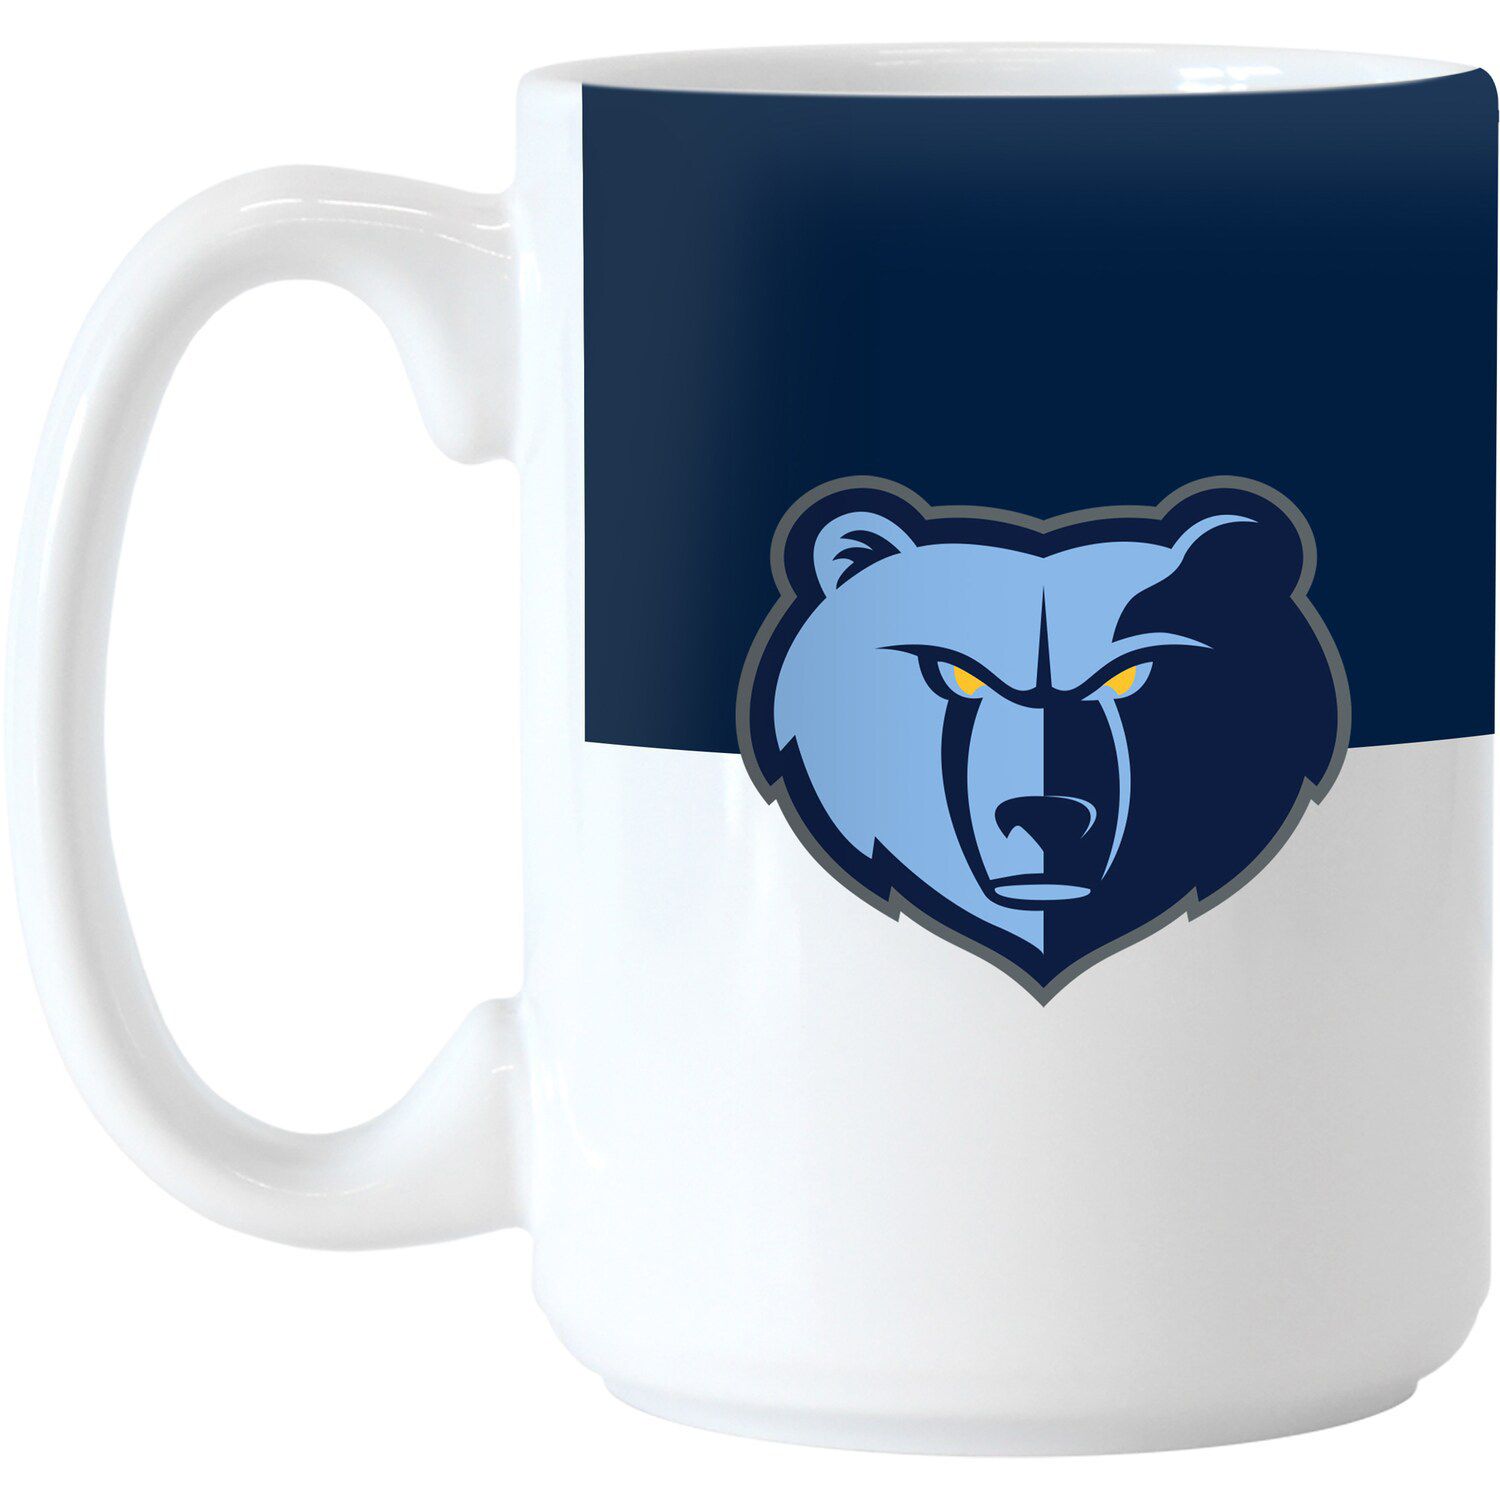 Image for Unbranded Memphis Grizzlies 15oz. Colorblock Mug at Kohl's.